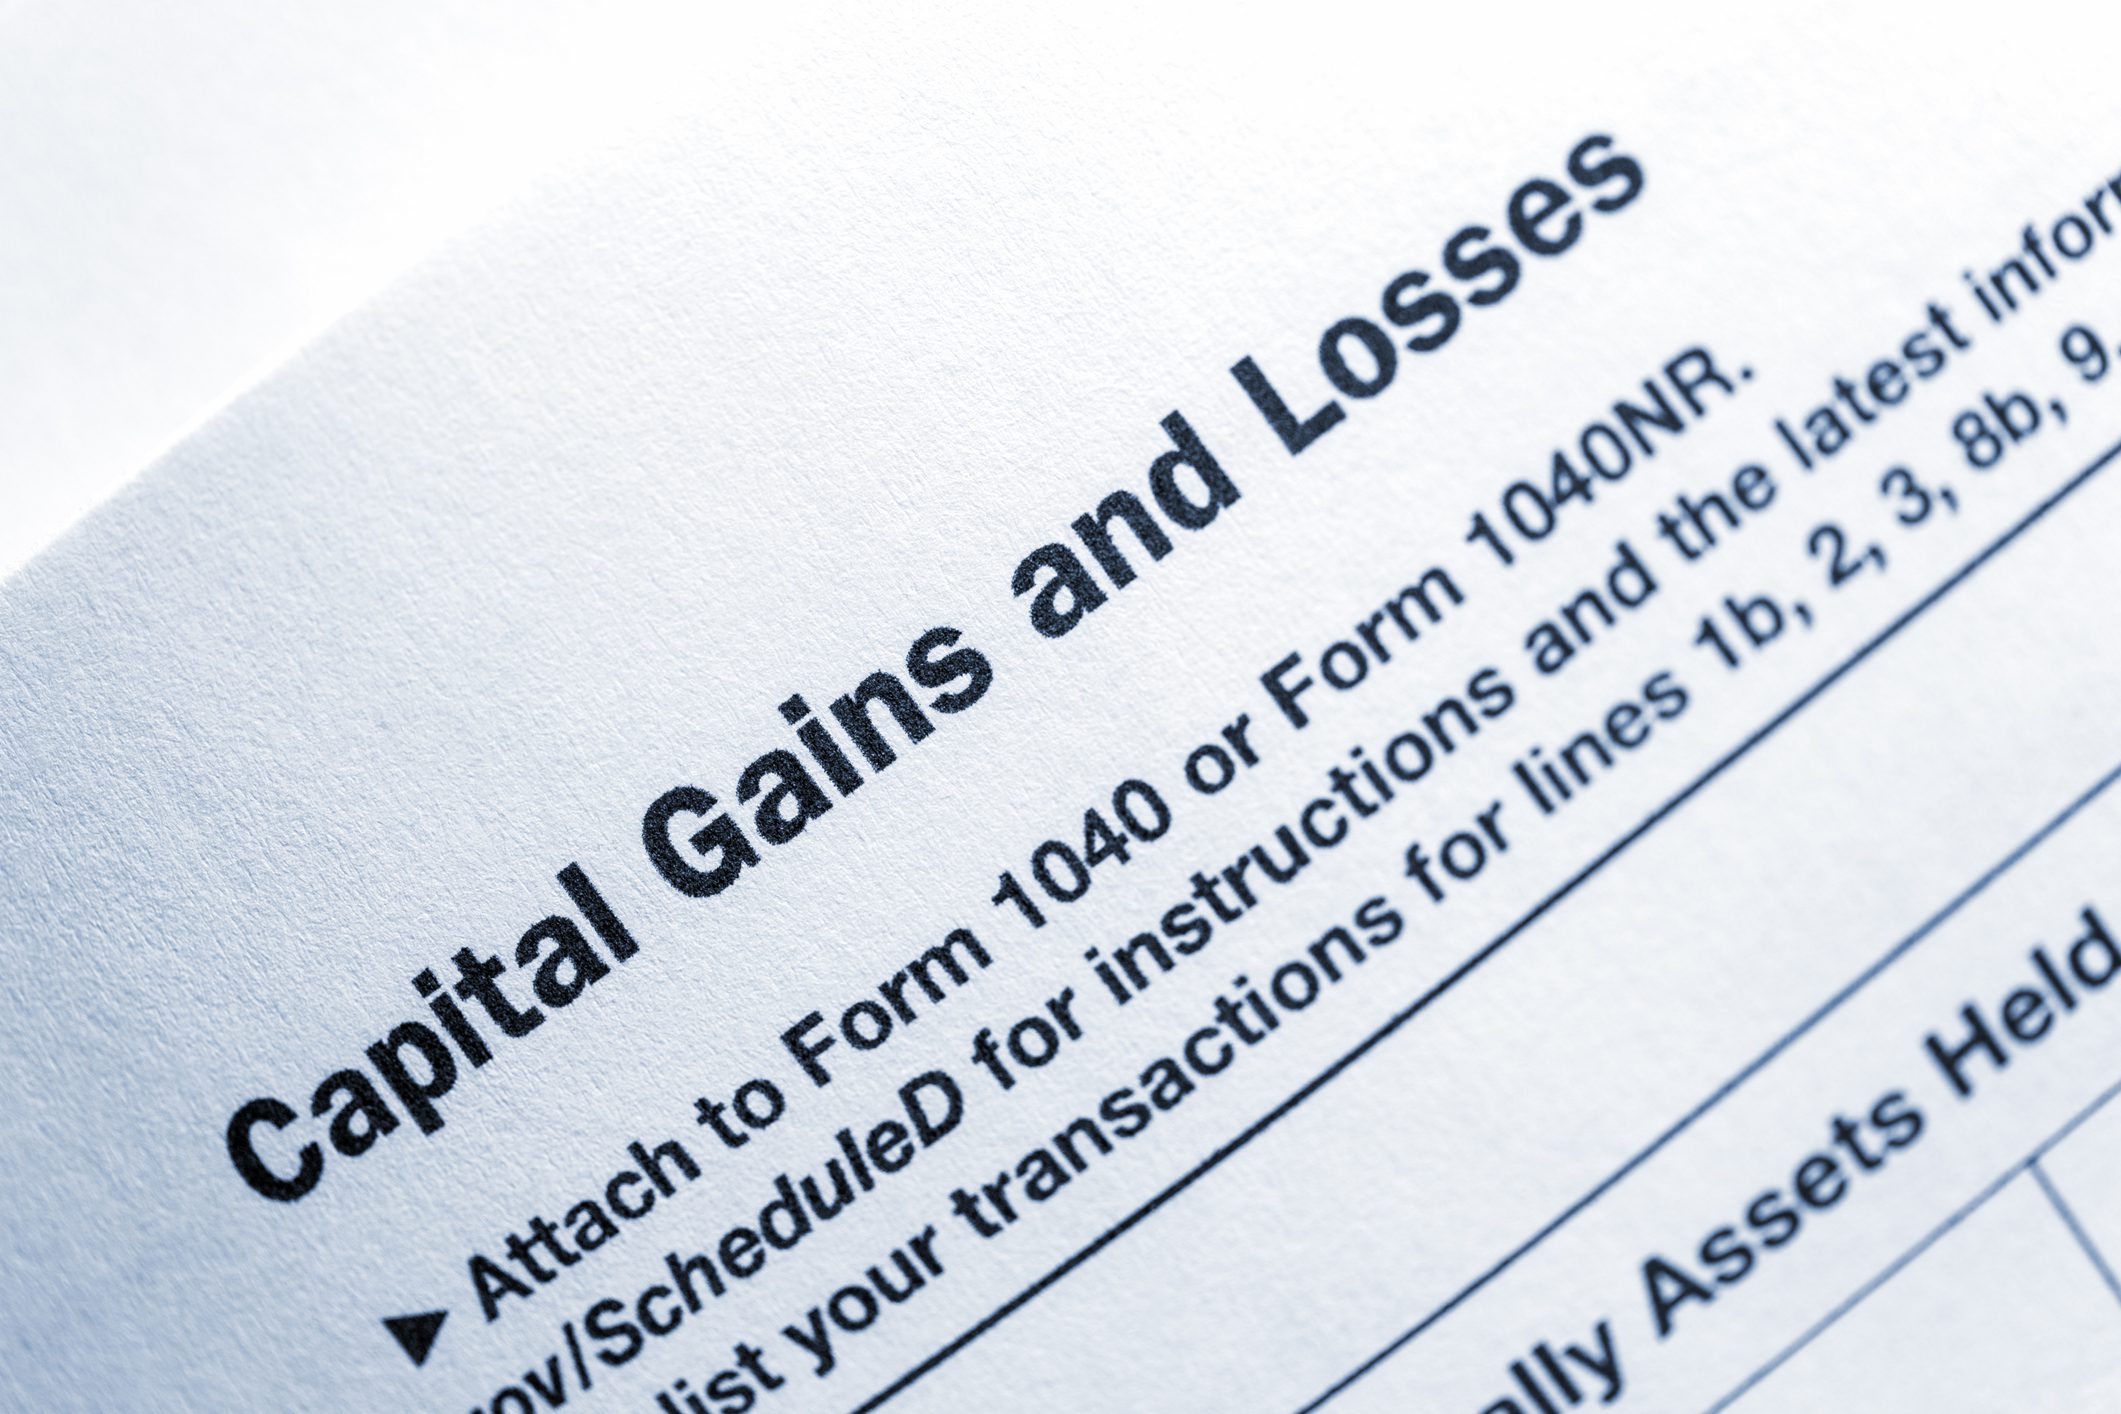 IRS Form for Calculating Capital Gains and Losses